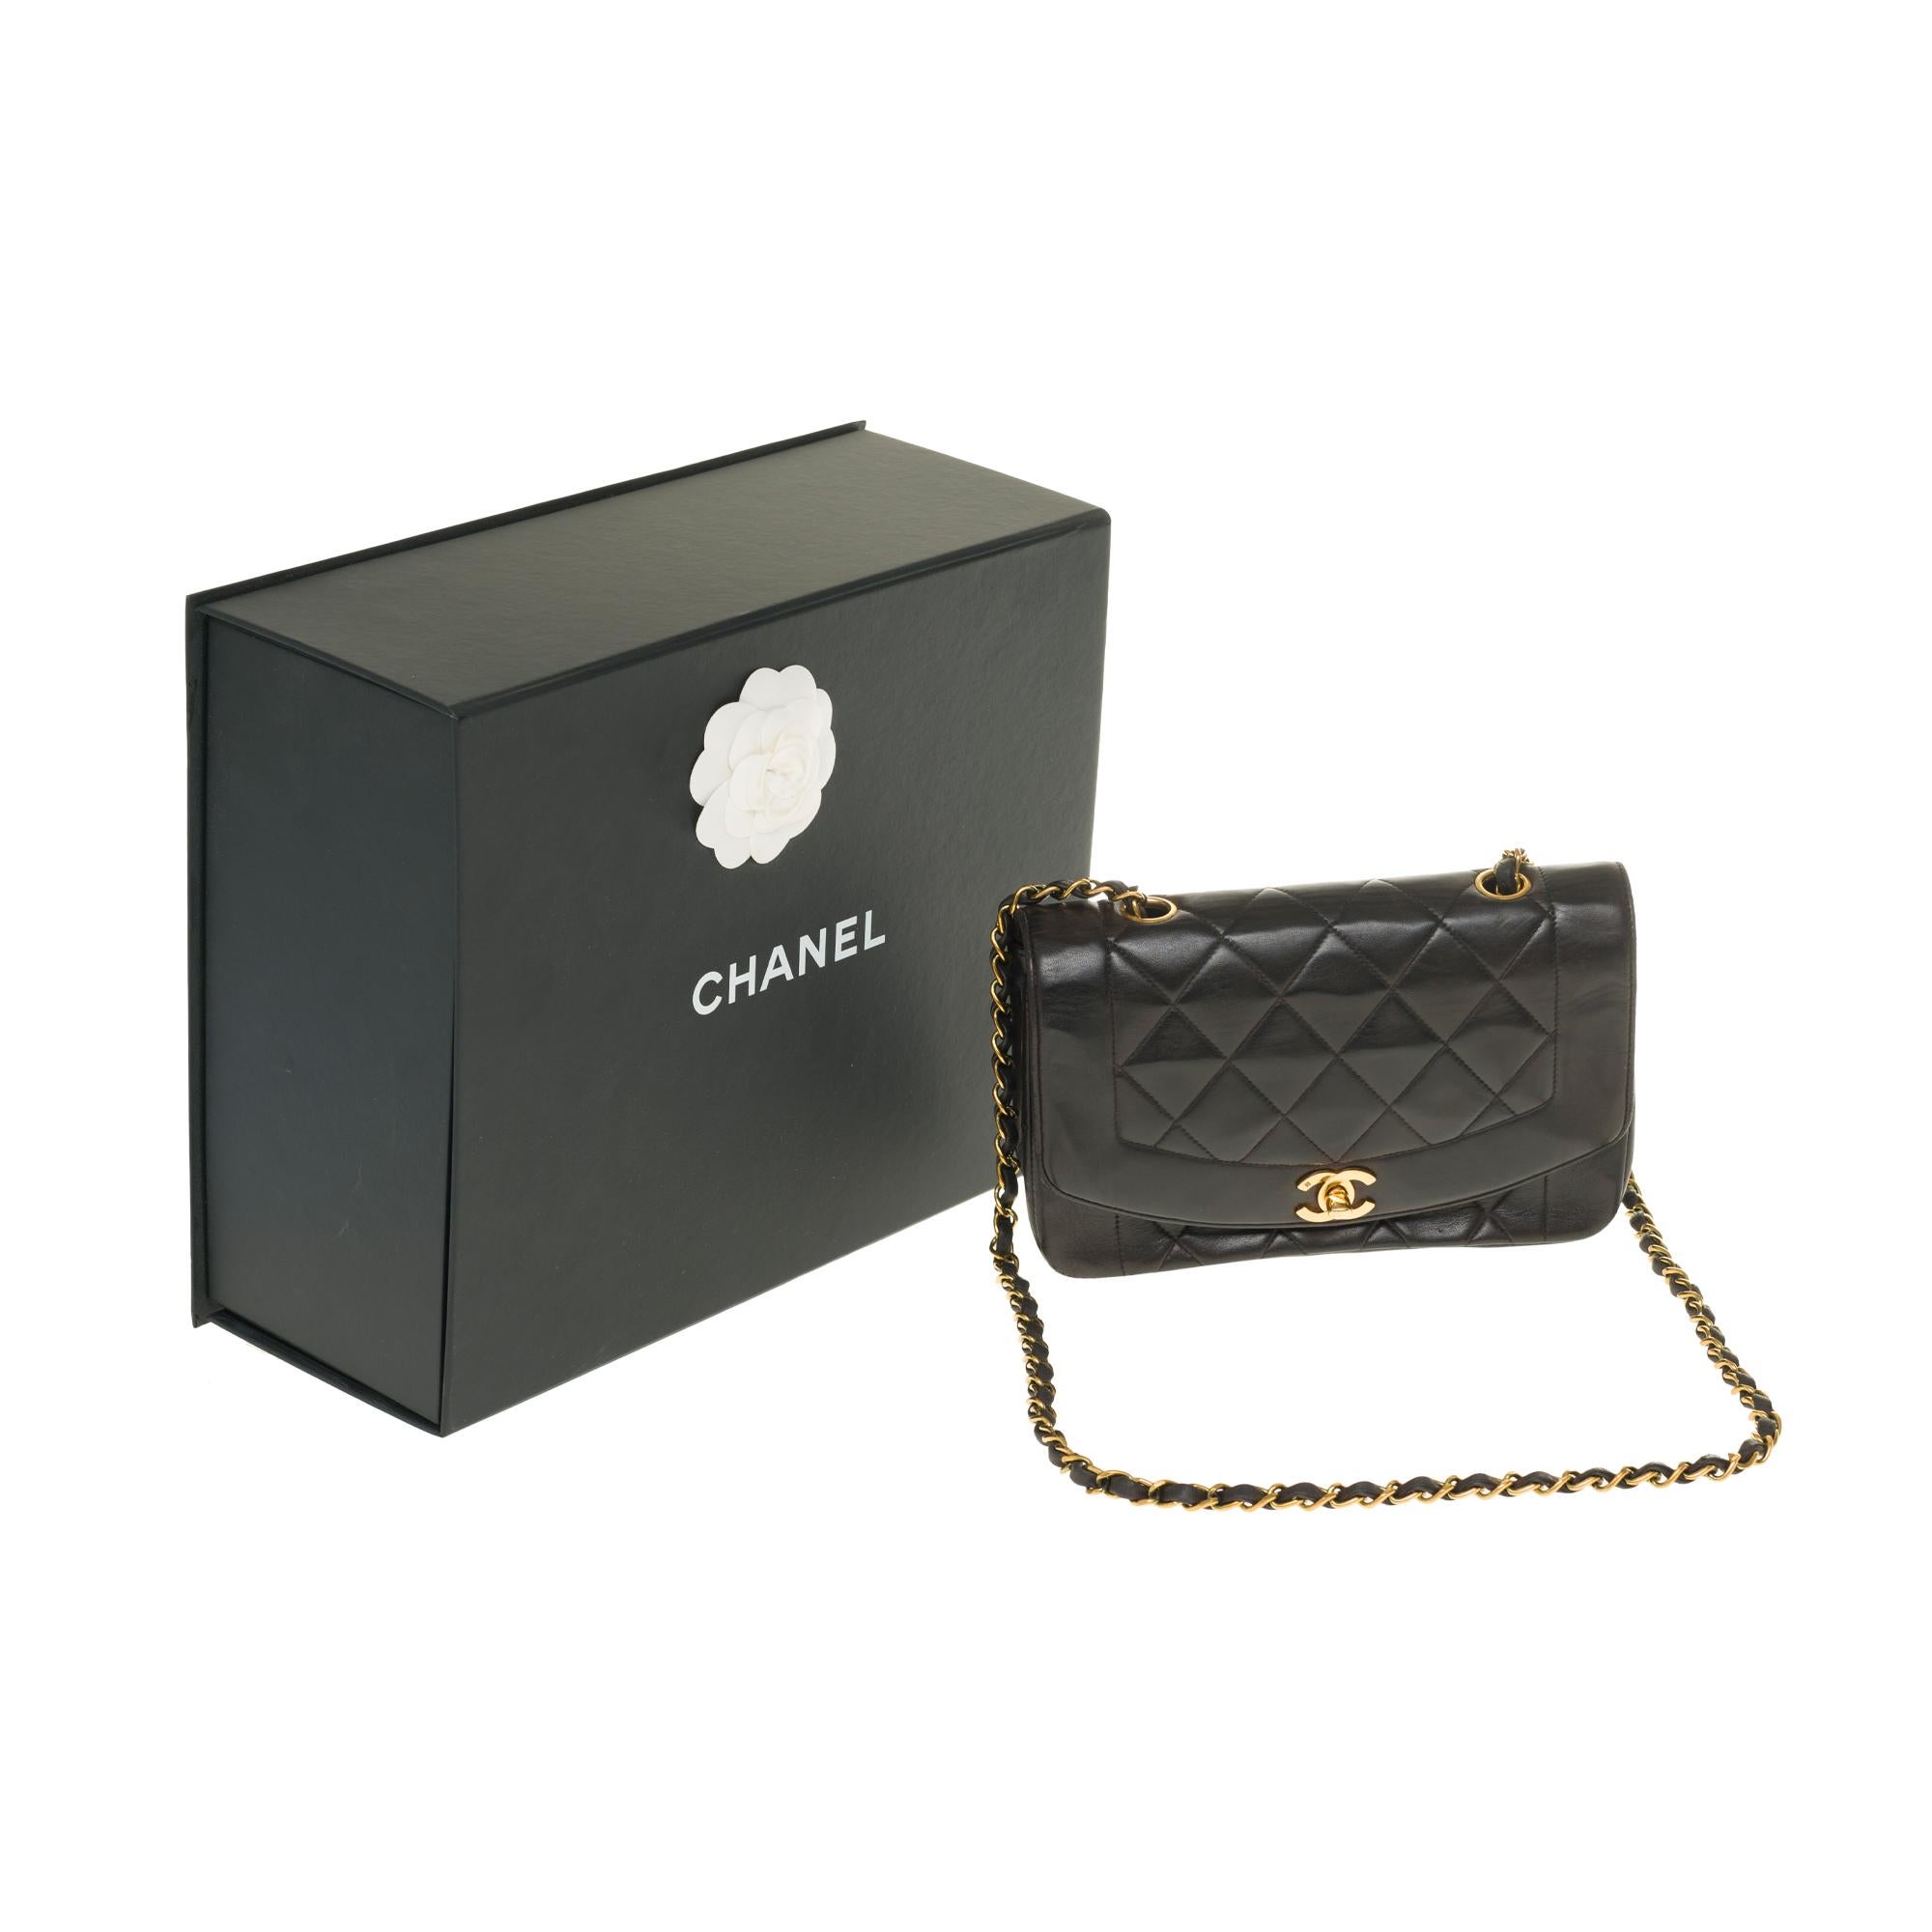 Stunning Chanel Diana Shoulder bag in black quilted lambskin with gold hardware 6